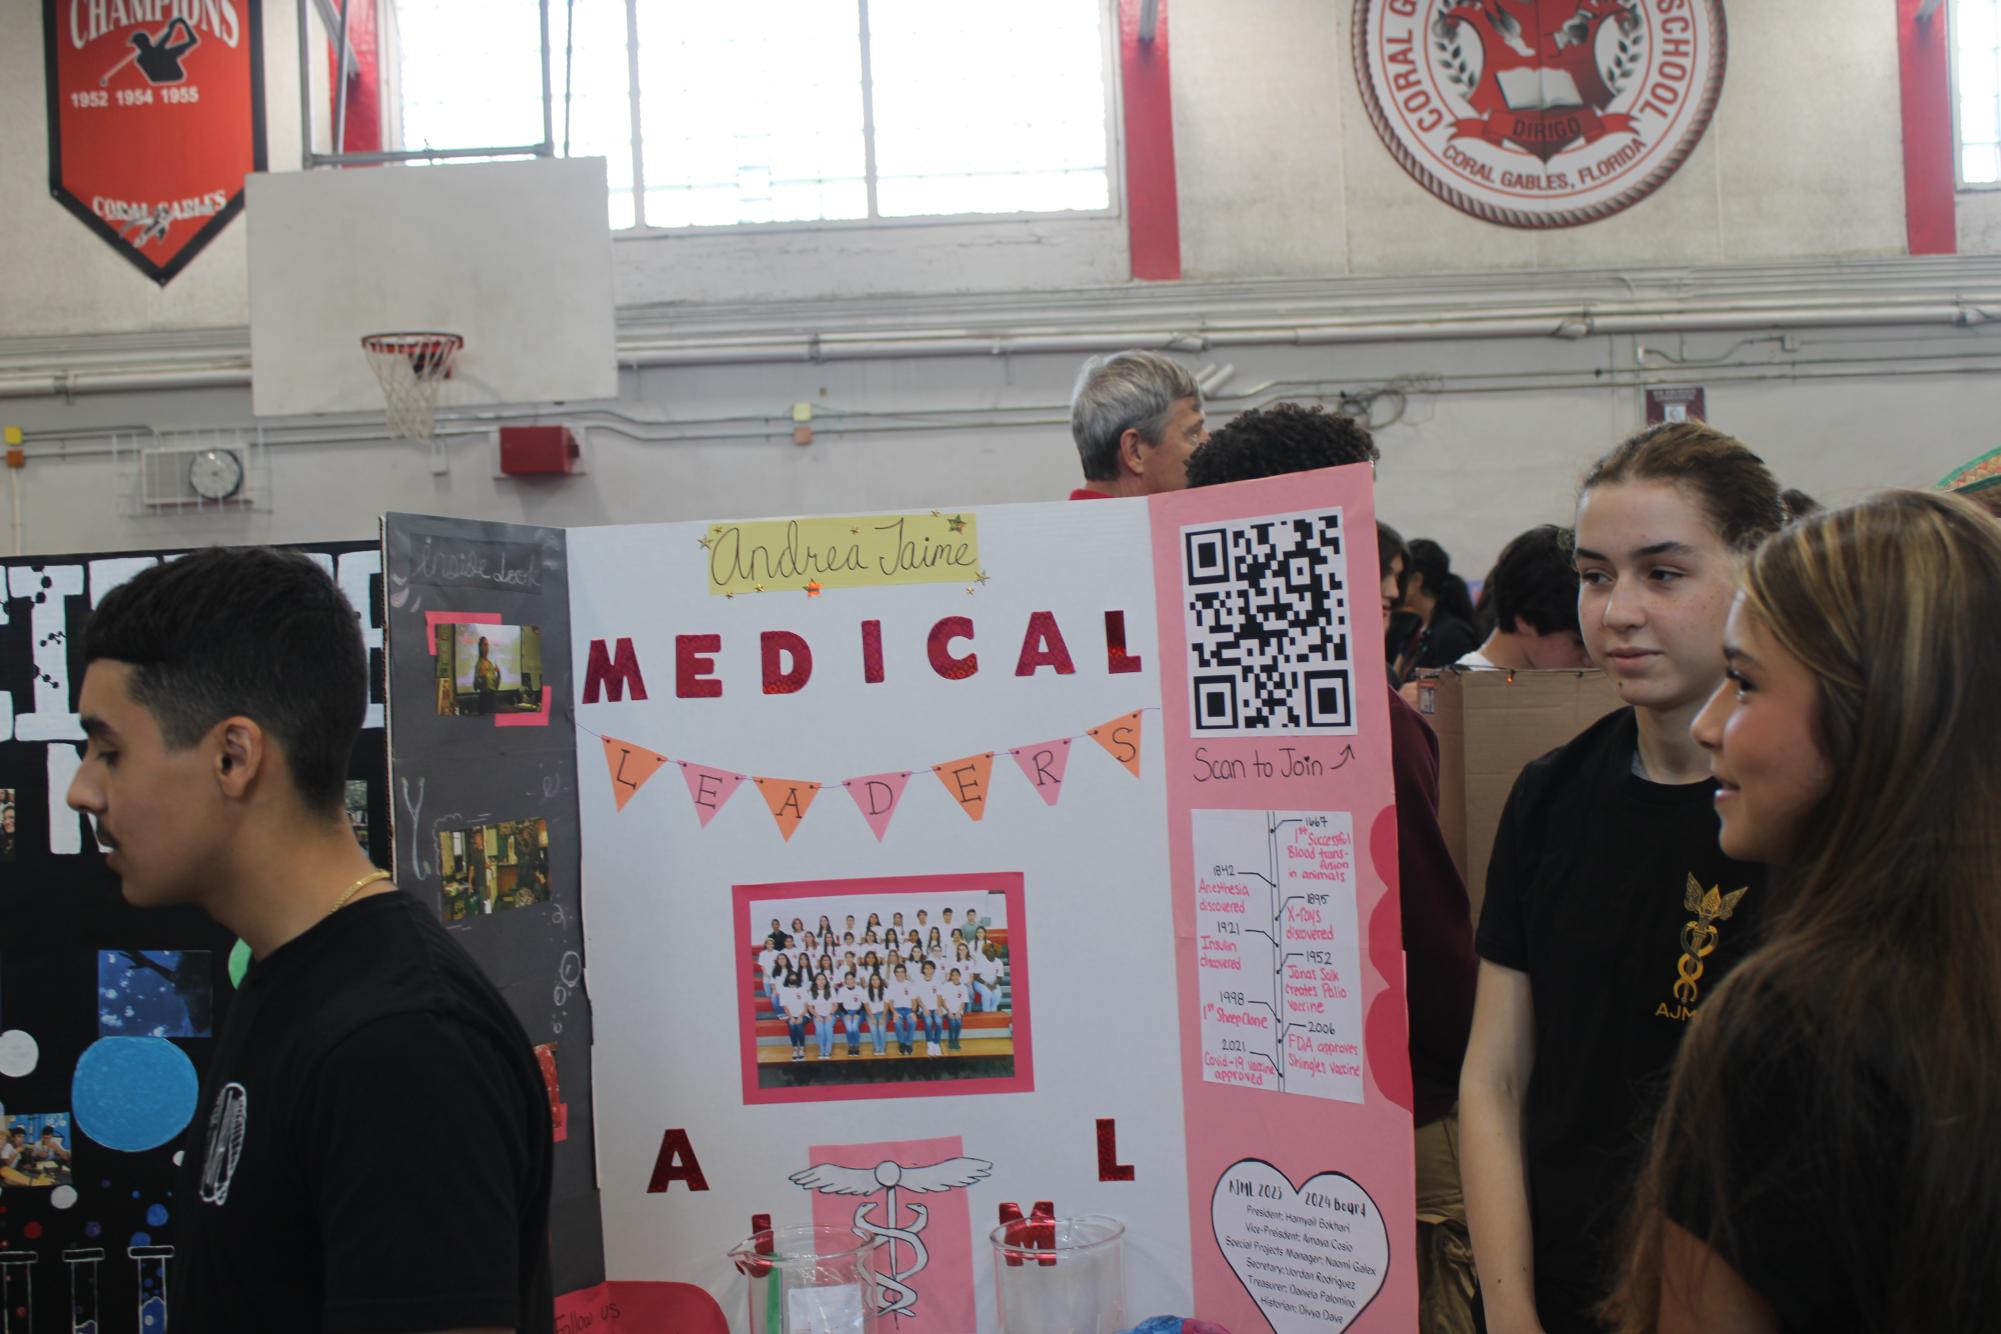 AJML is Gables pre-medical club for students interested in the medical field.